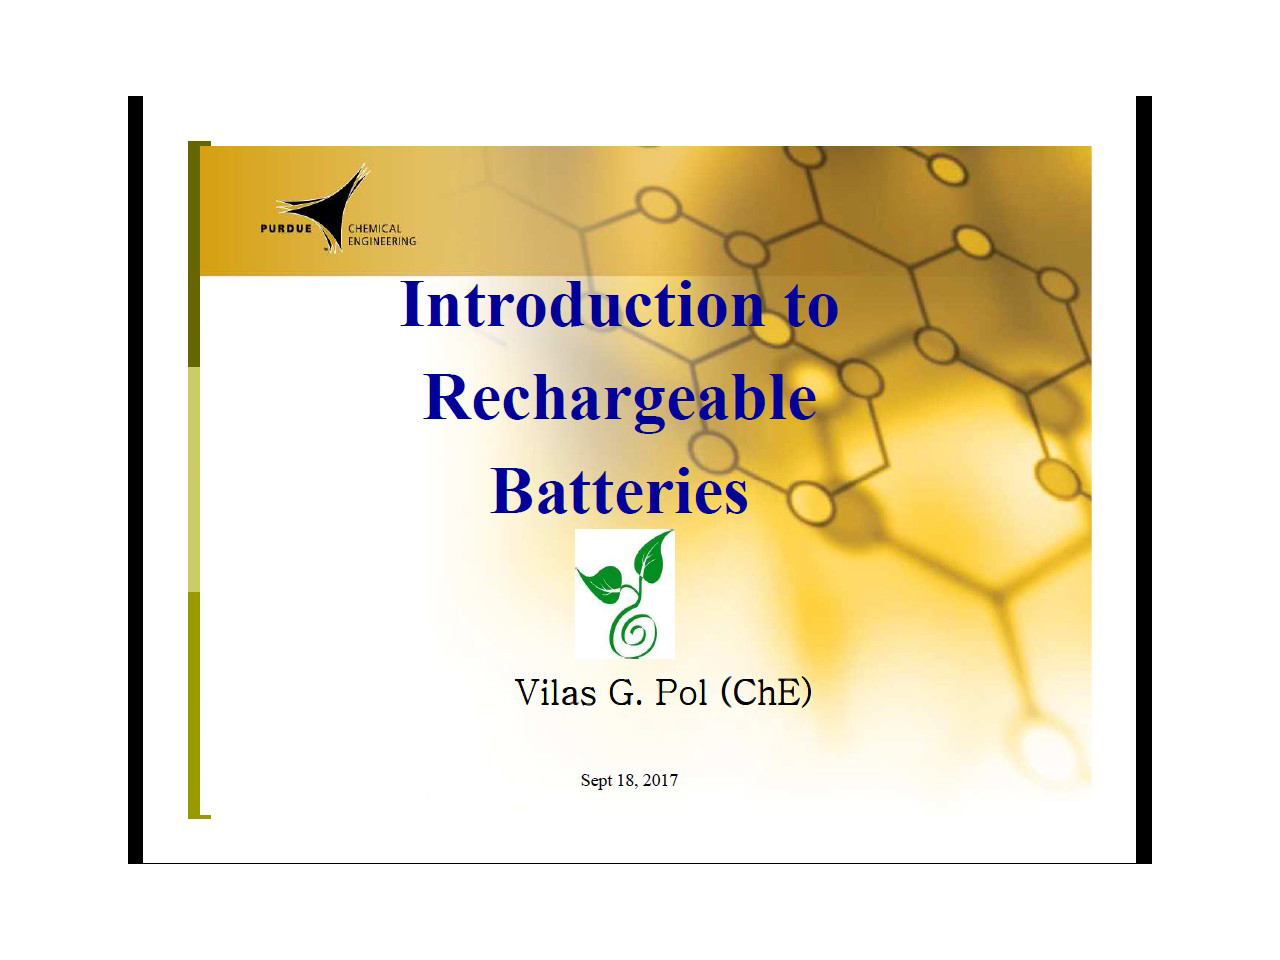 Introduction to Rechargeable Batteries